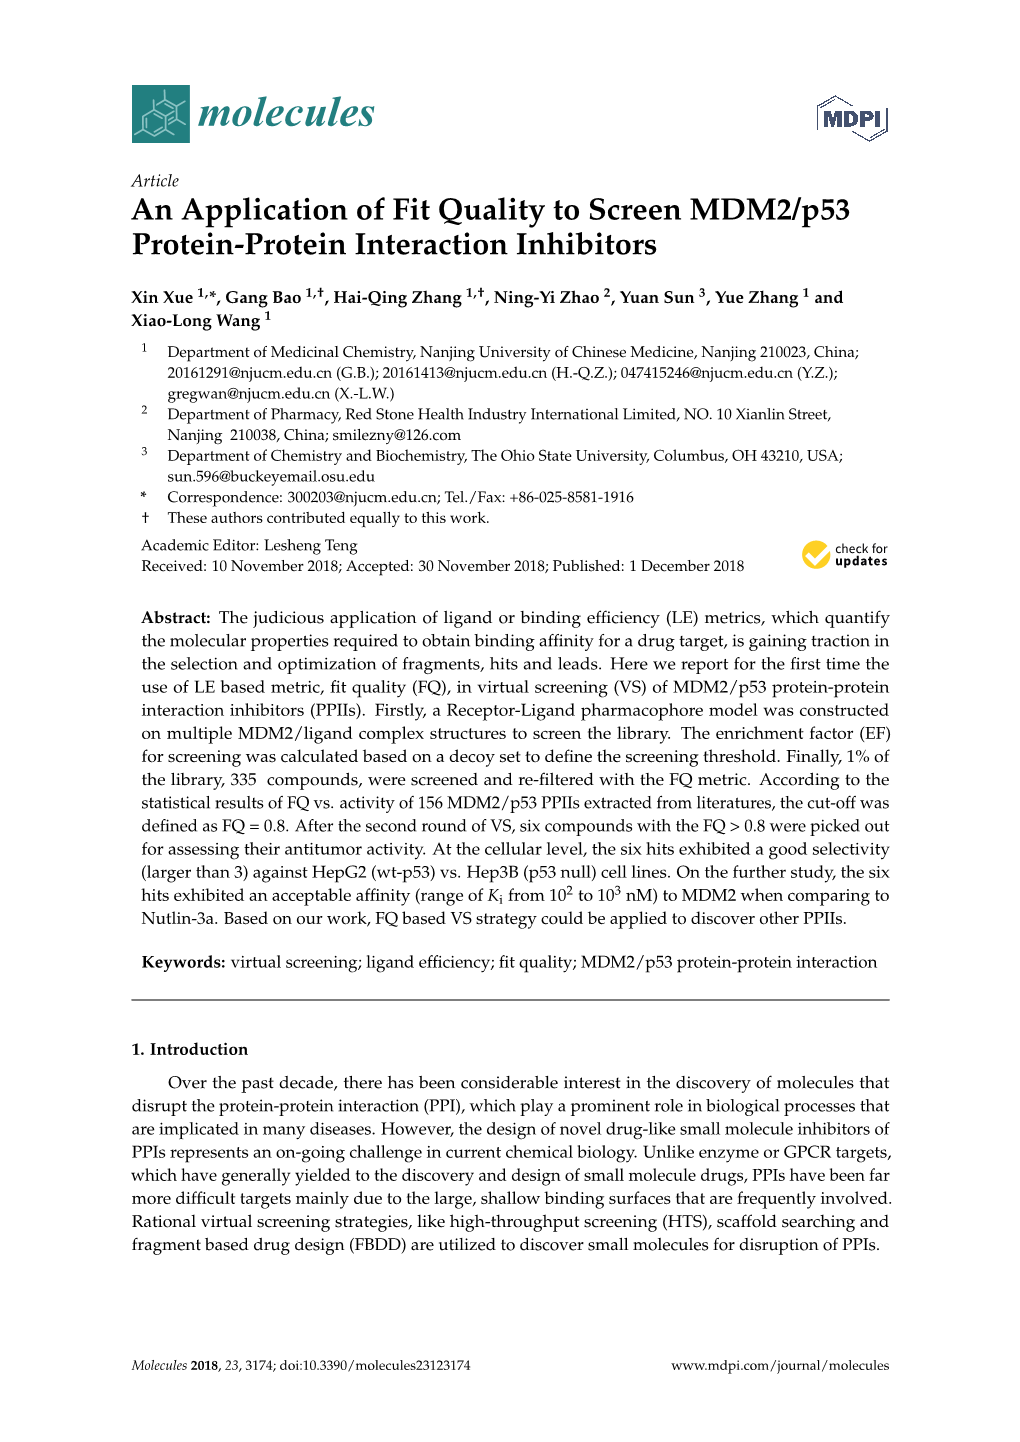 An Application of Fit Quality to Screen MDM2/P53 Protein-Protein Interaction Inhibitors